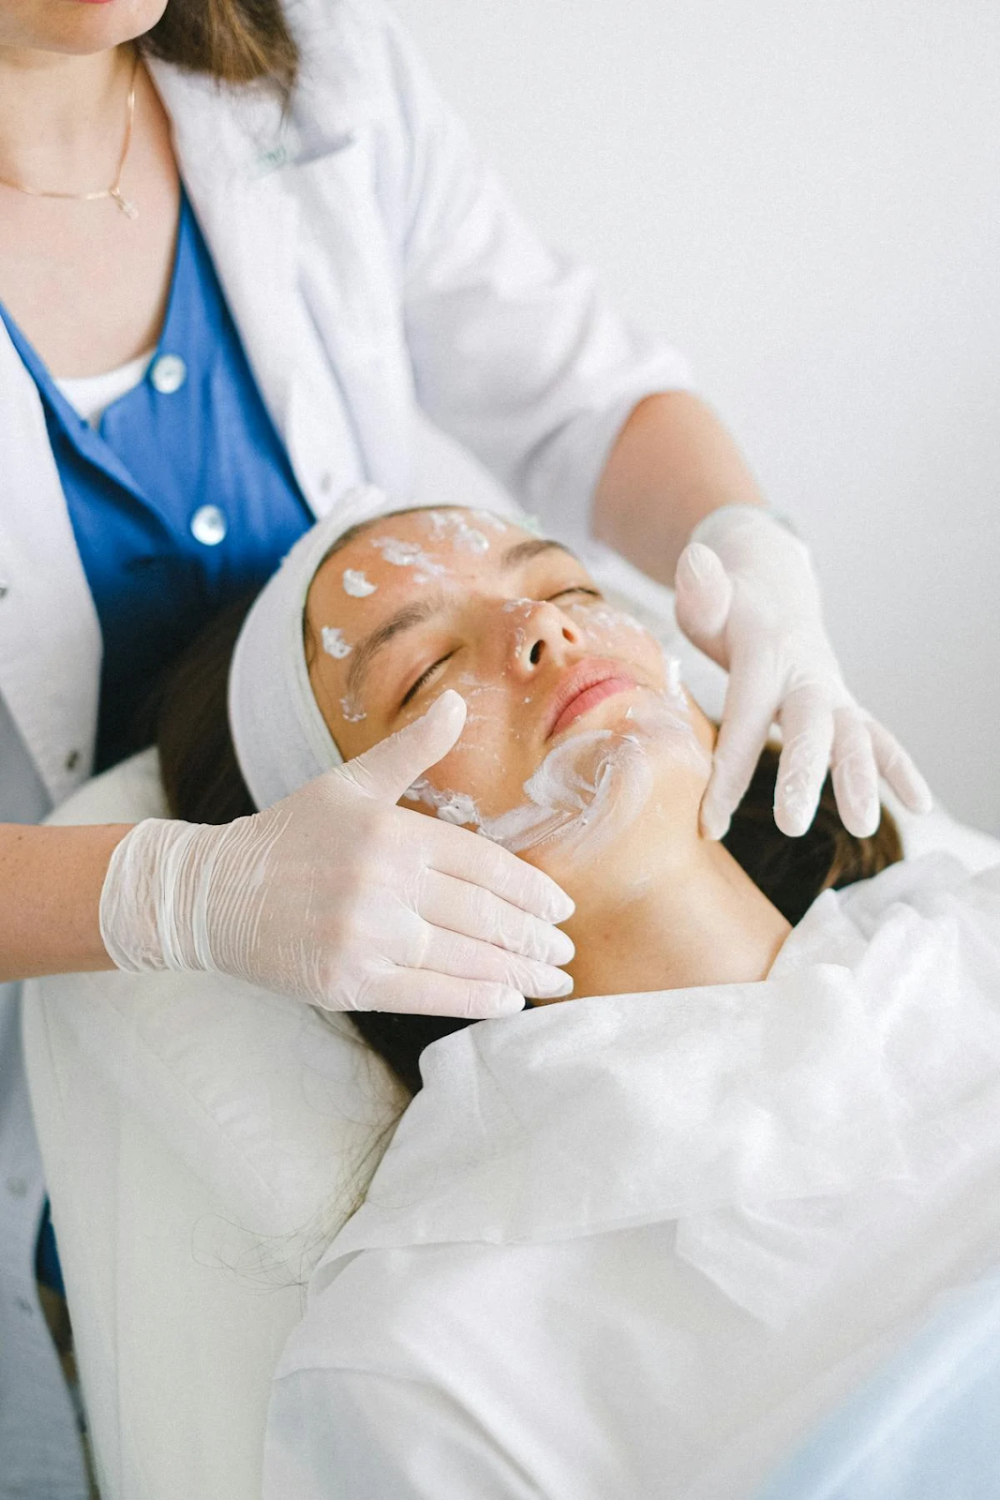 a woman at a skin care session where someone is applying lotion on her face